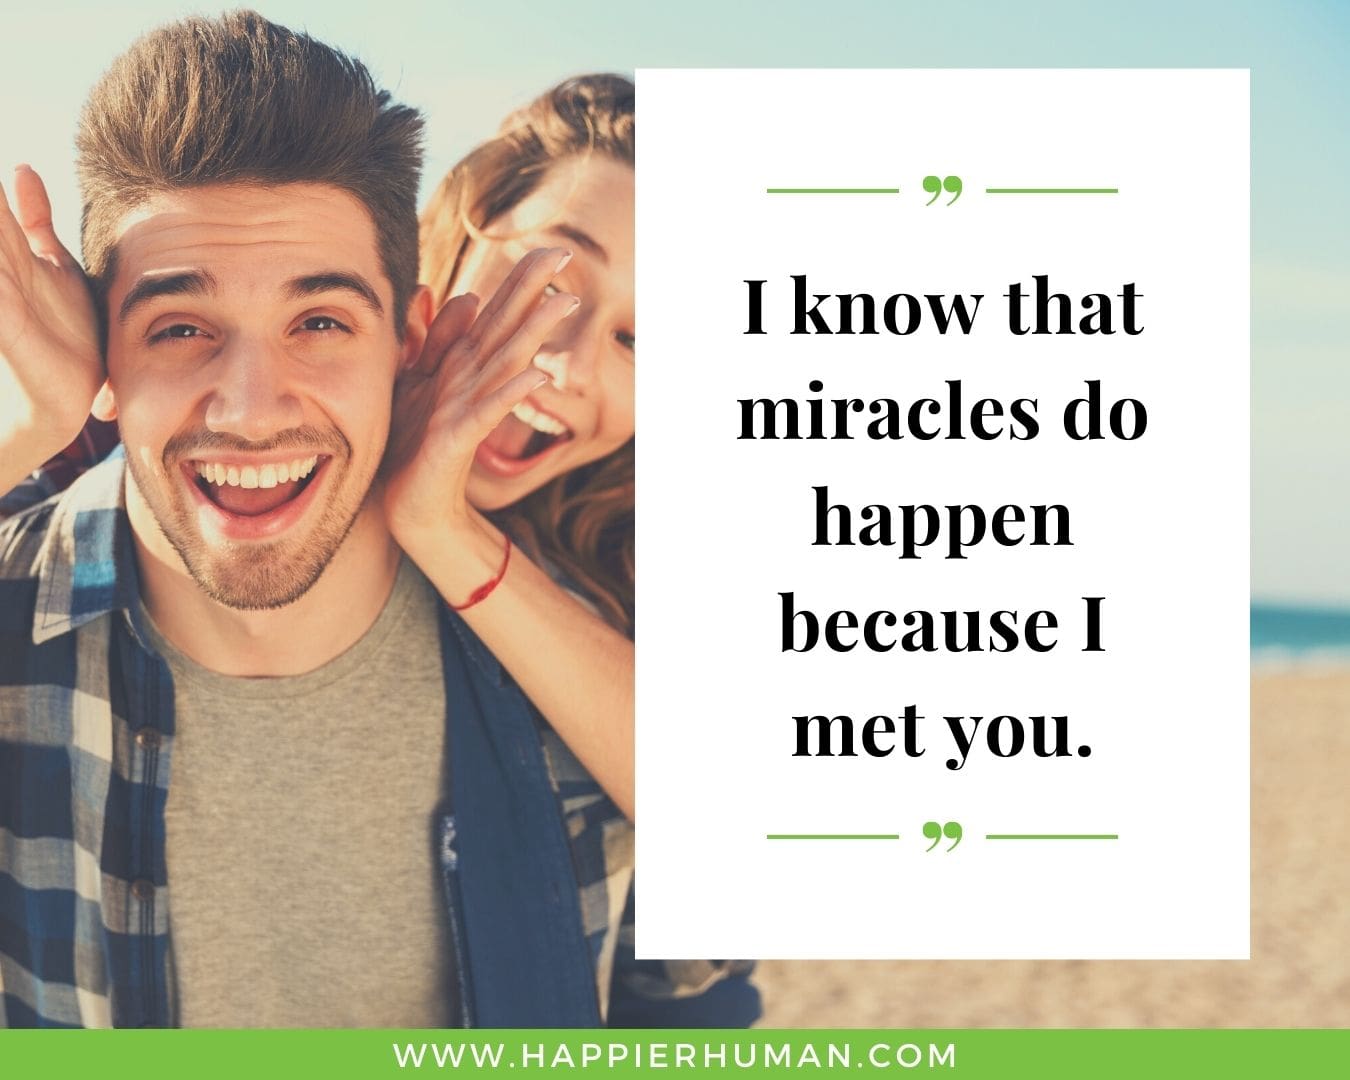 Messages to show her she cares - “I know that miracles do happen because I met you.”